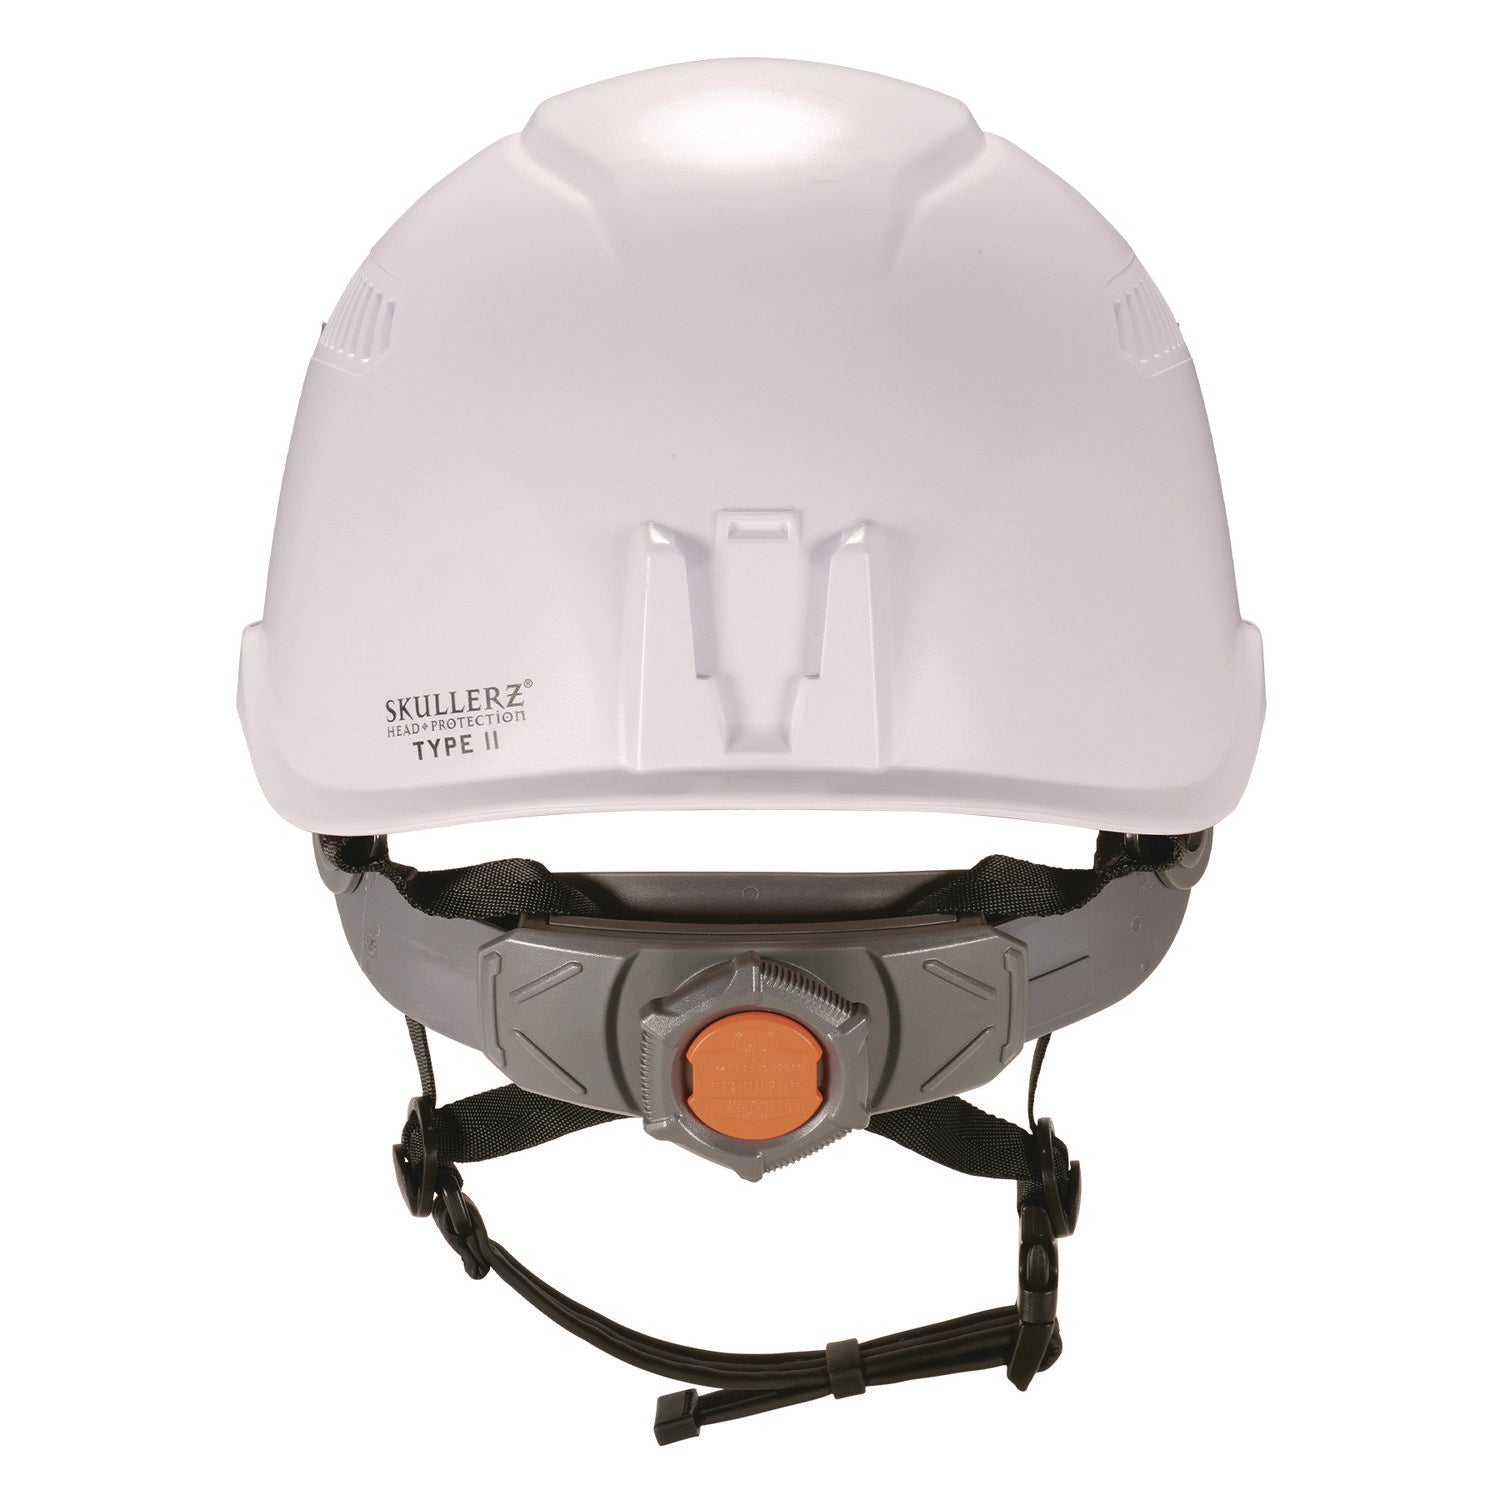 class-c-safety-helmet-with-led-light-and-adjustable-venting-6-point-rachet-suspension-white-ships-in-1-3-business-days_ego60265 - 2